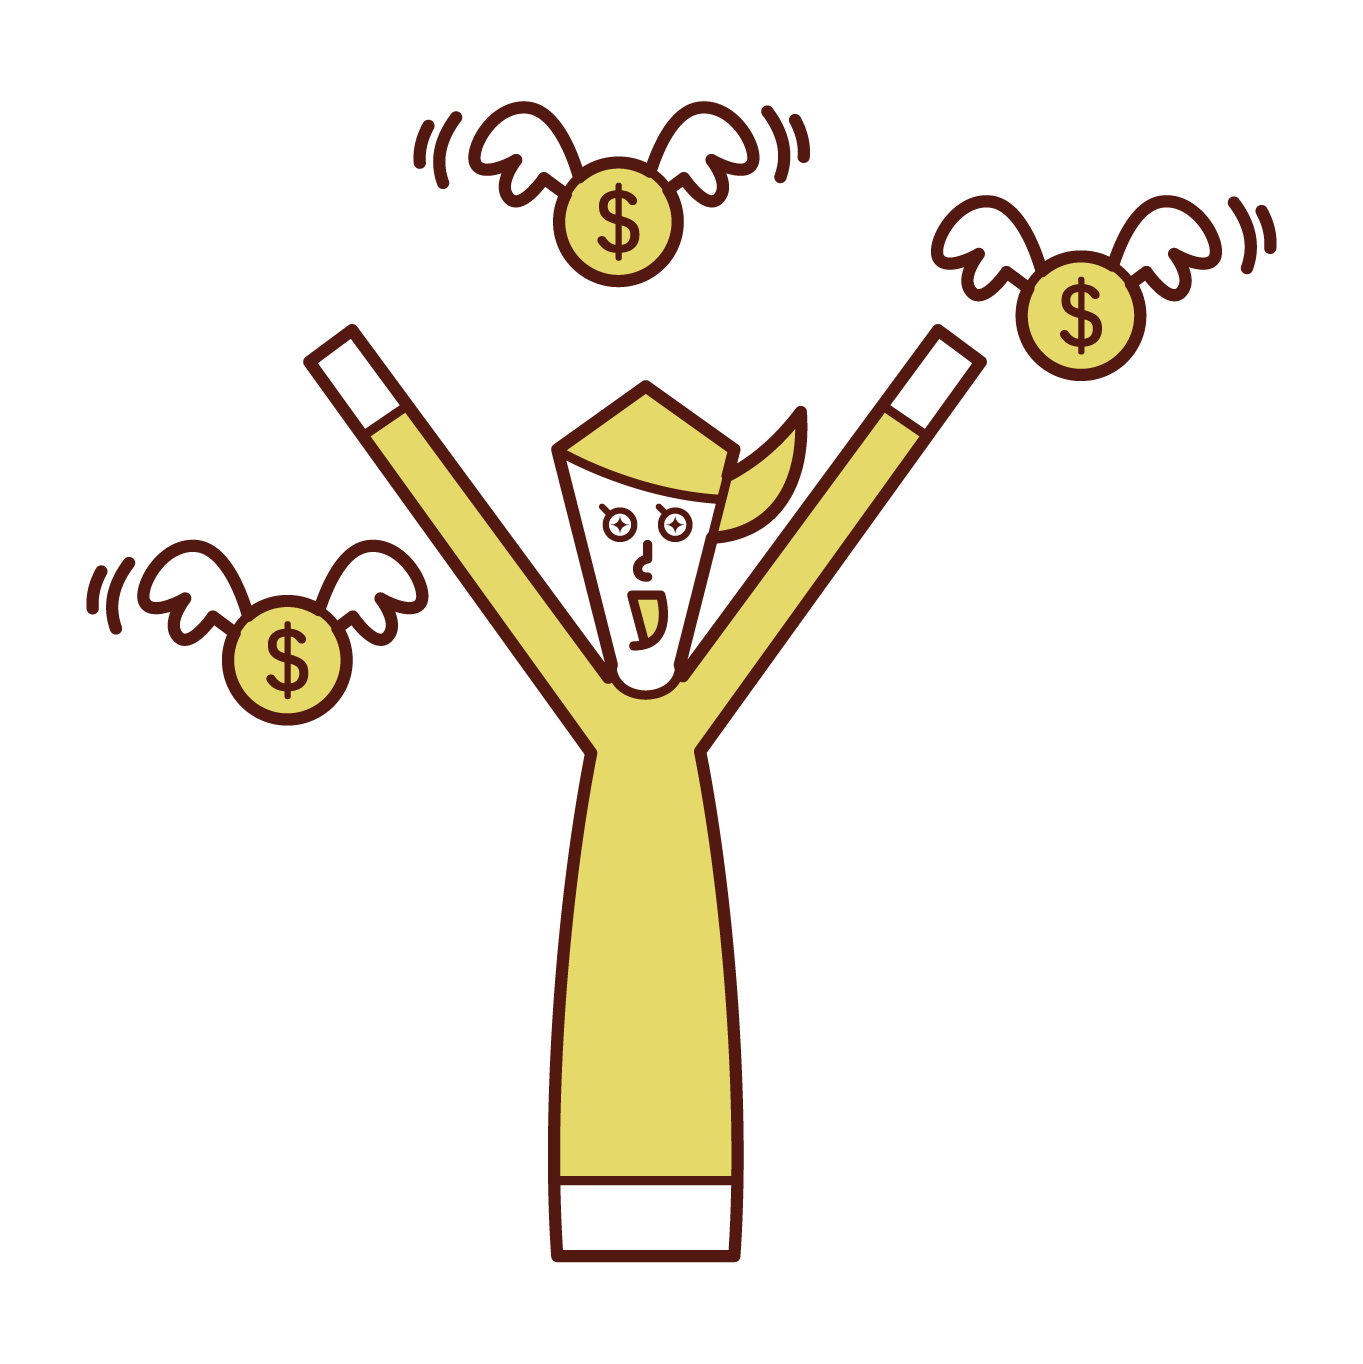 Illustration of a person (woman) who is pleased with earning a temporary income